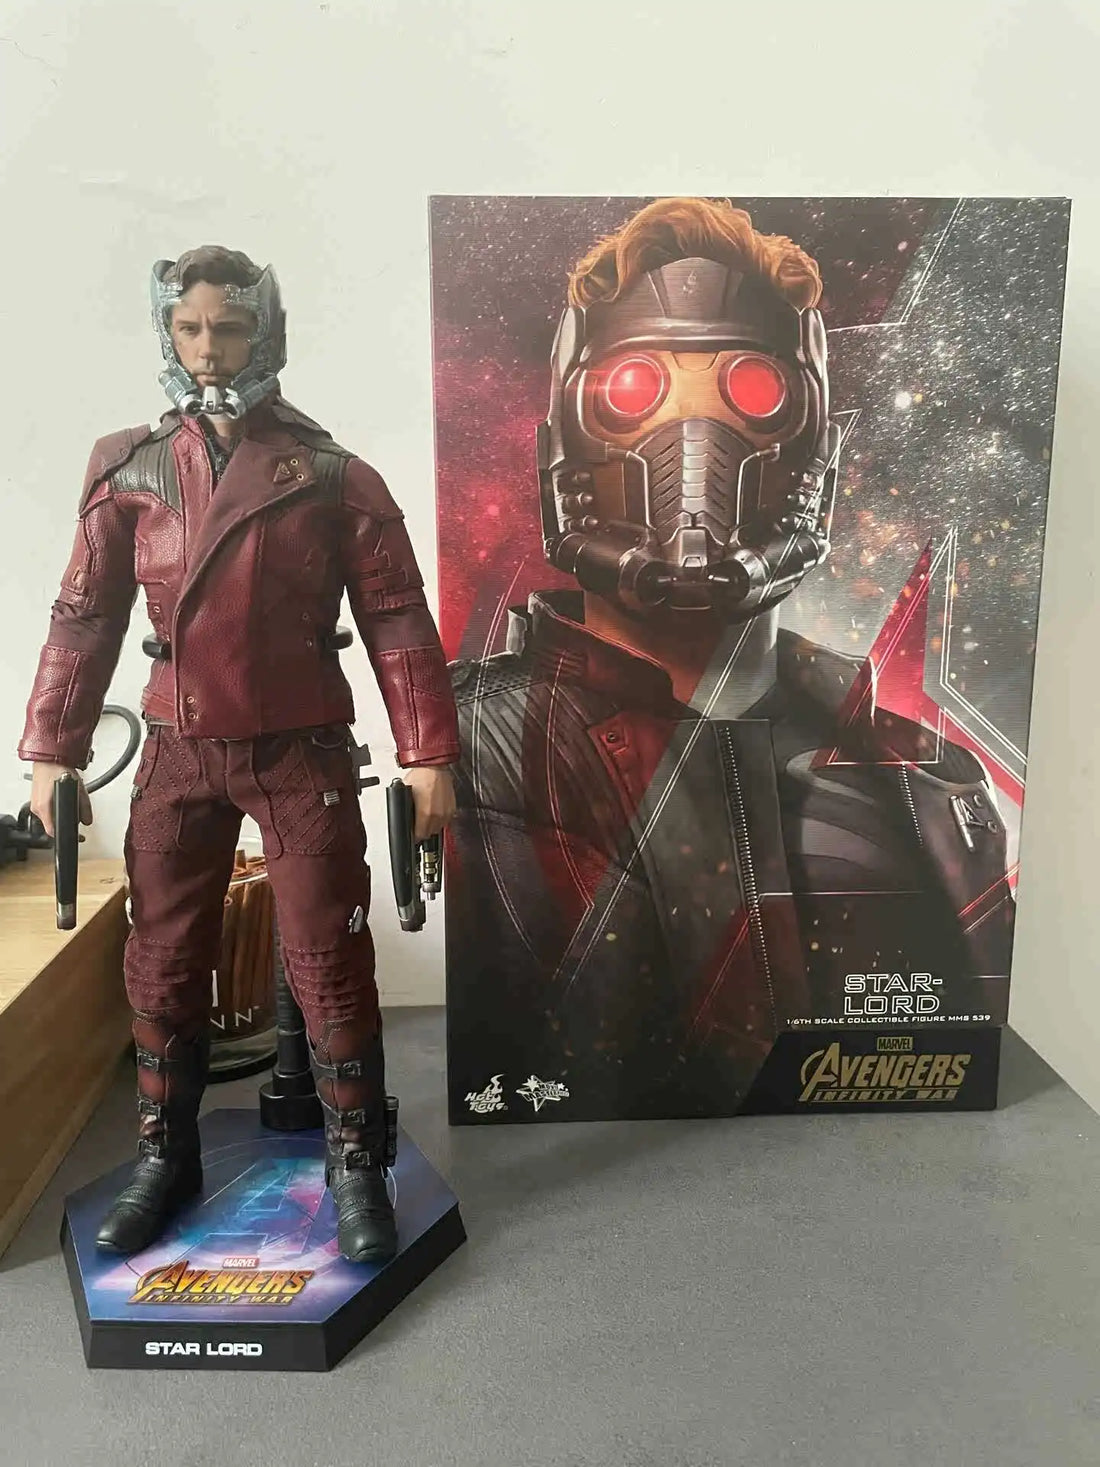 Stock 100% Original Hottoys Ht Mms539 Star Lord Peter Quill Avengers Infinity War Movie Character Model Art Collection Gift Toy